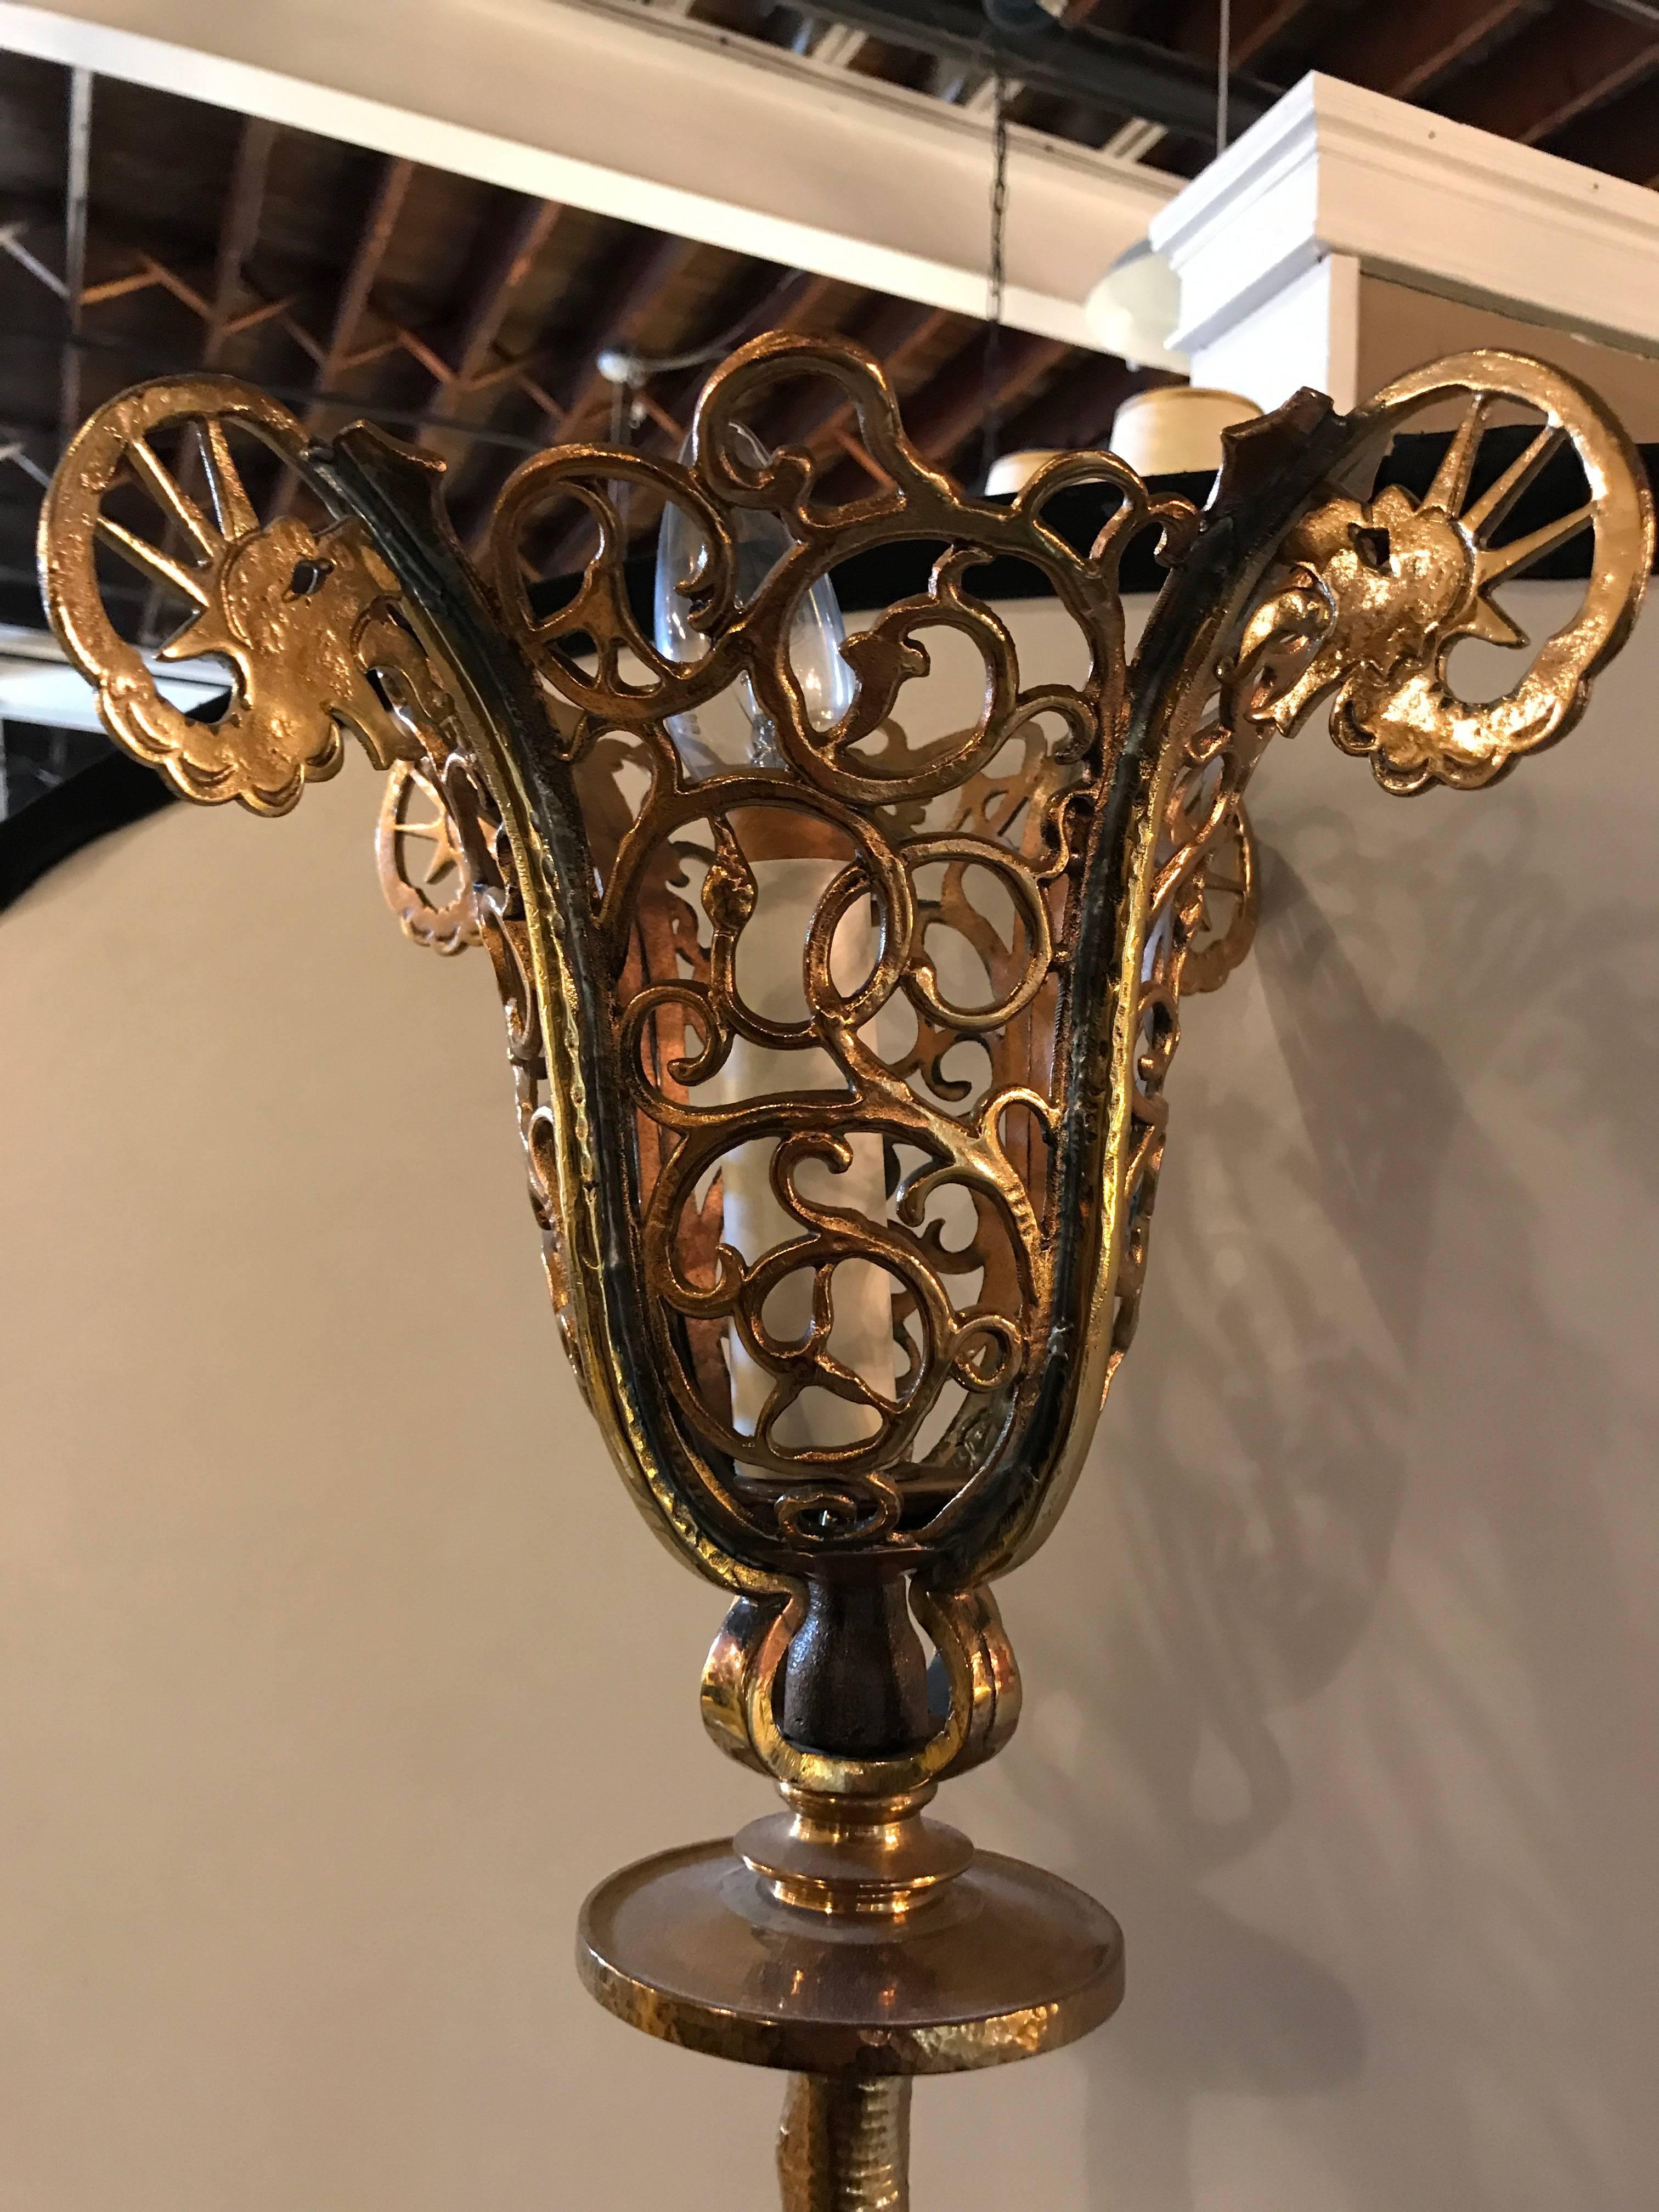 Art Deco bronze torchiere standing lamp. Hollywood Regency style with scroll and leaf design taking one bulb.